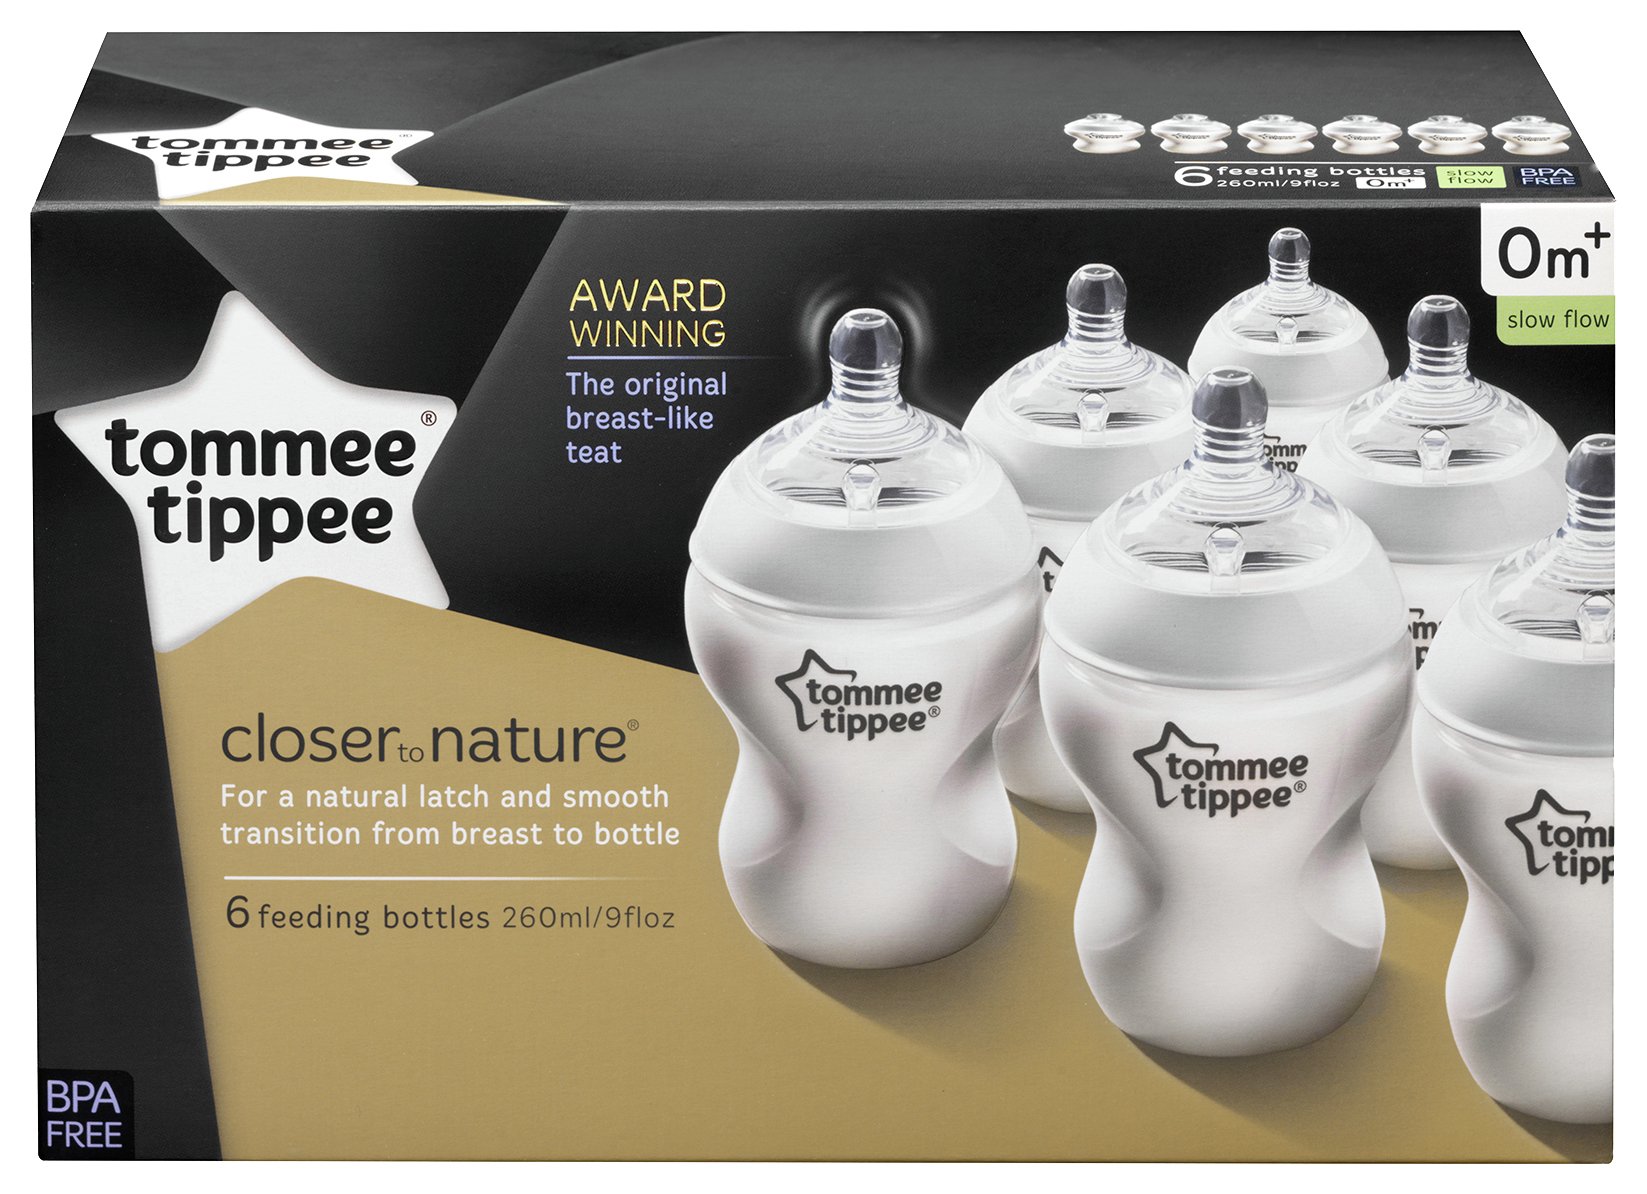 Tommee Tippee Closer to Nature Bottles 6 x 260ml Review